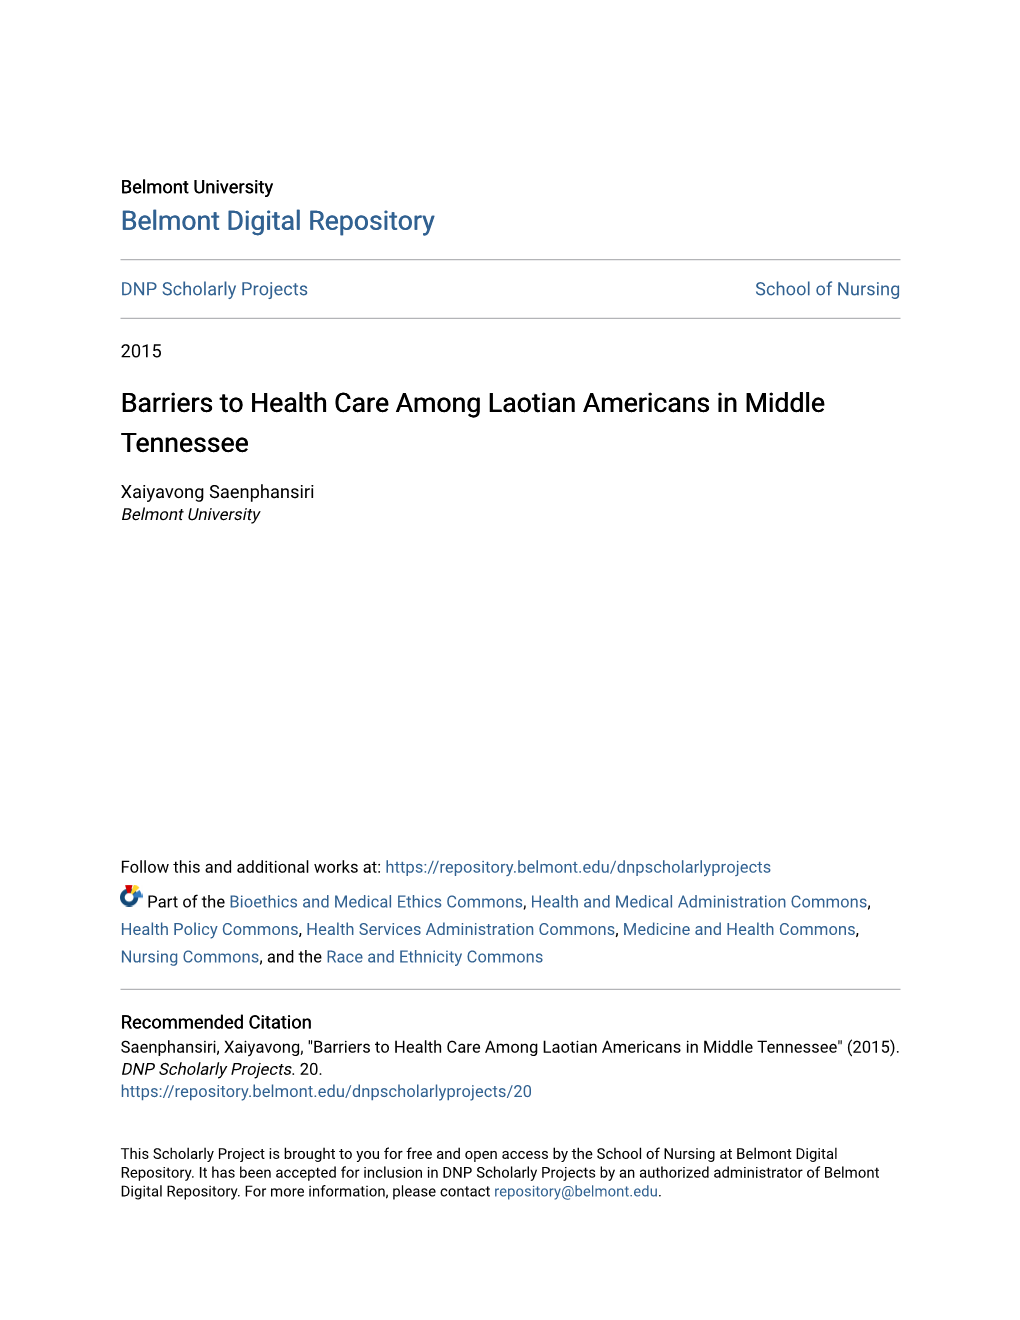 Barriers to Health Care Among Laotian Americans in Middle Tennessee